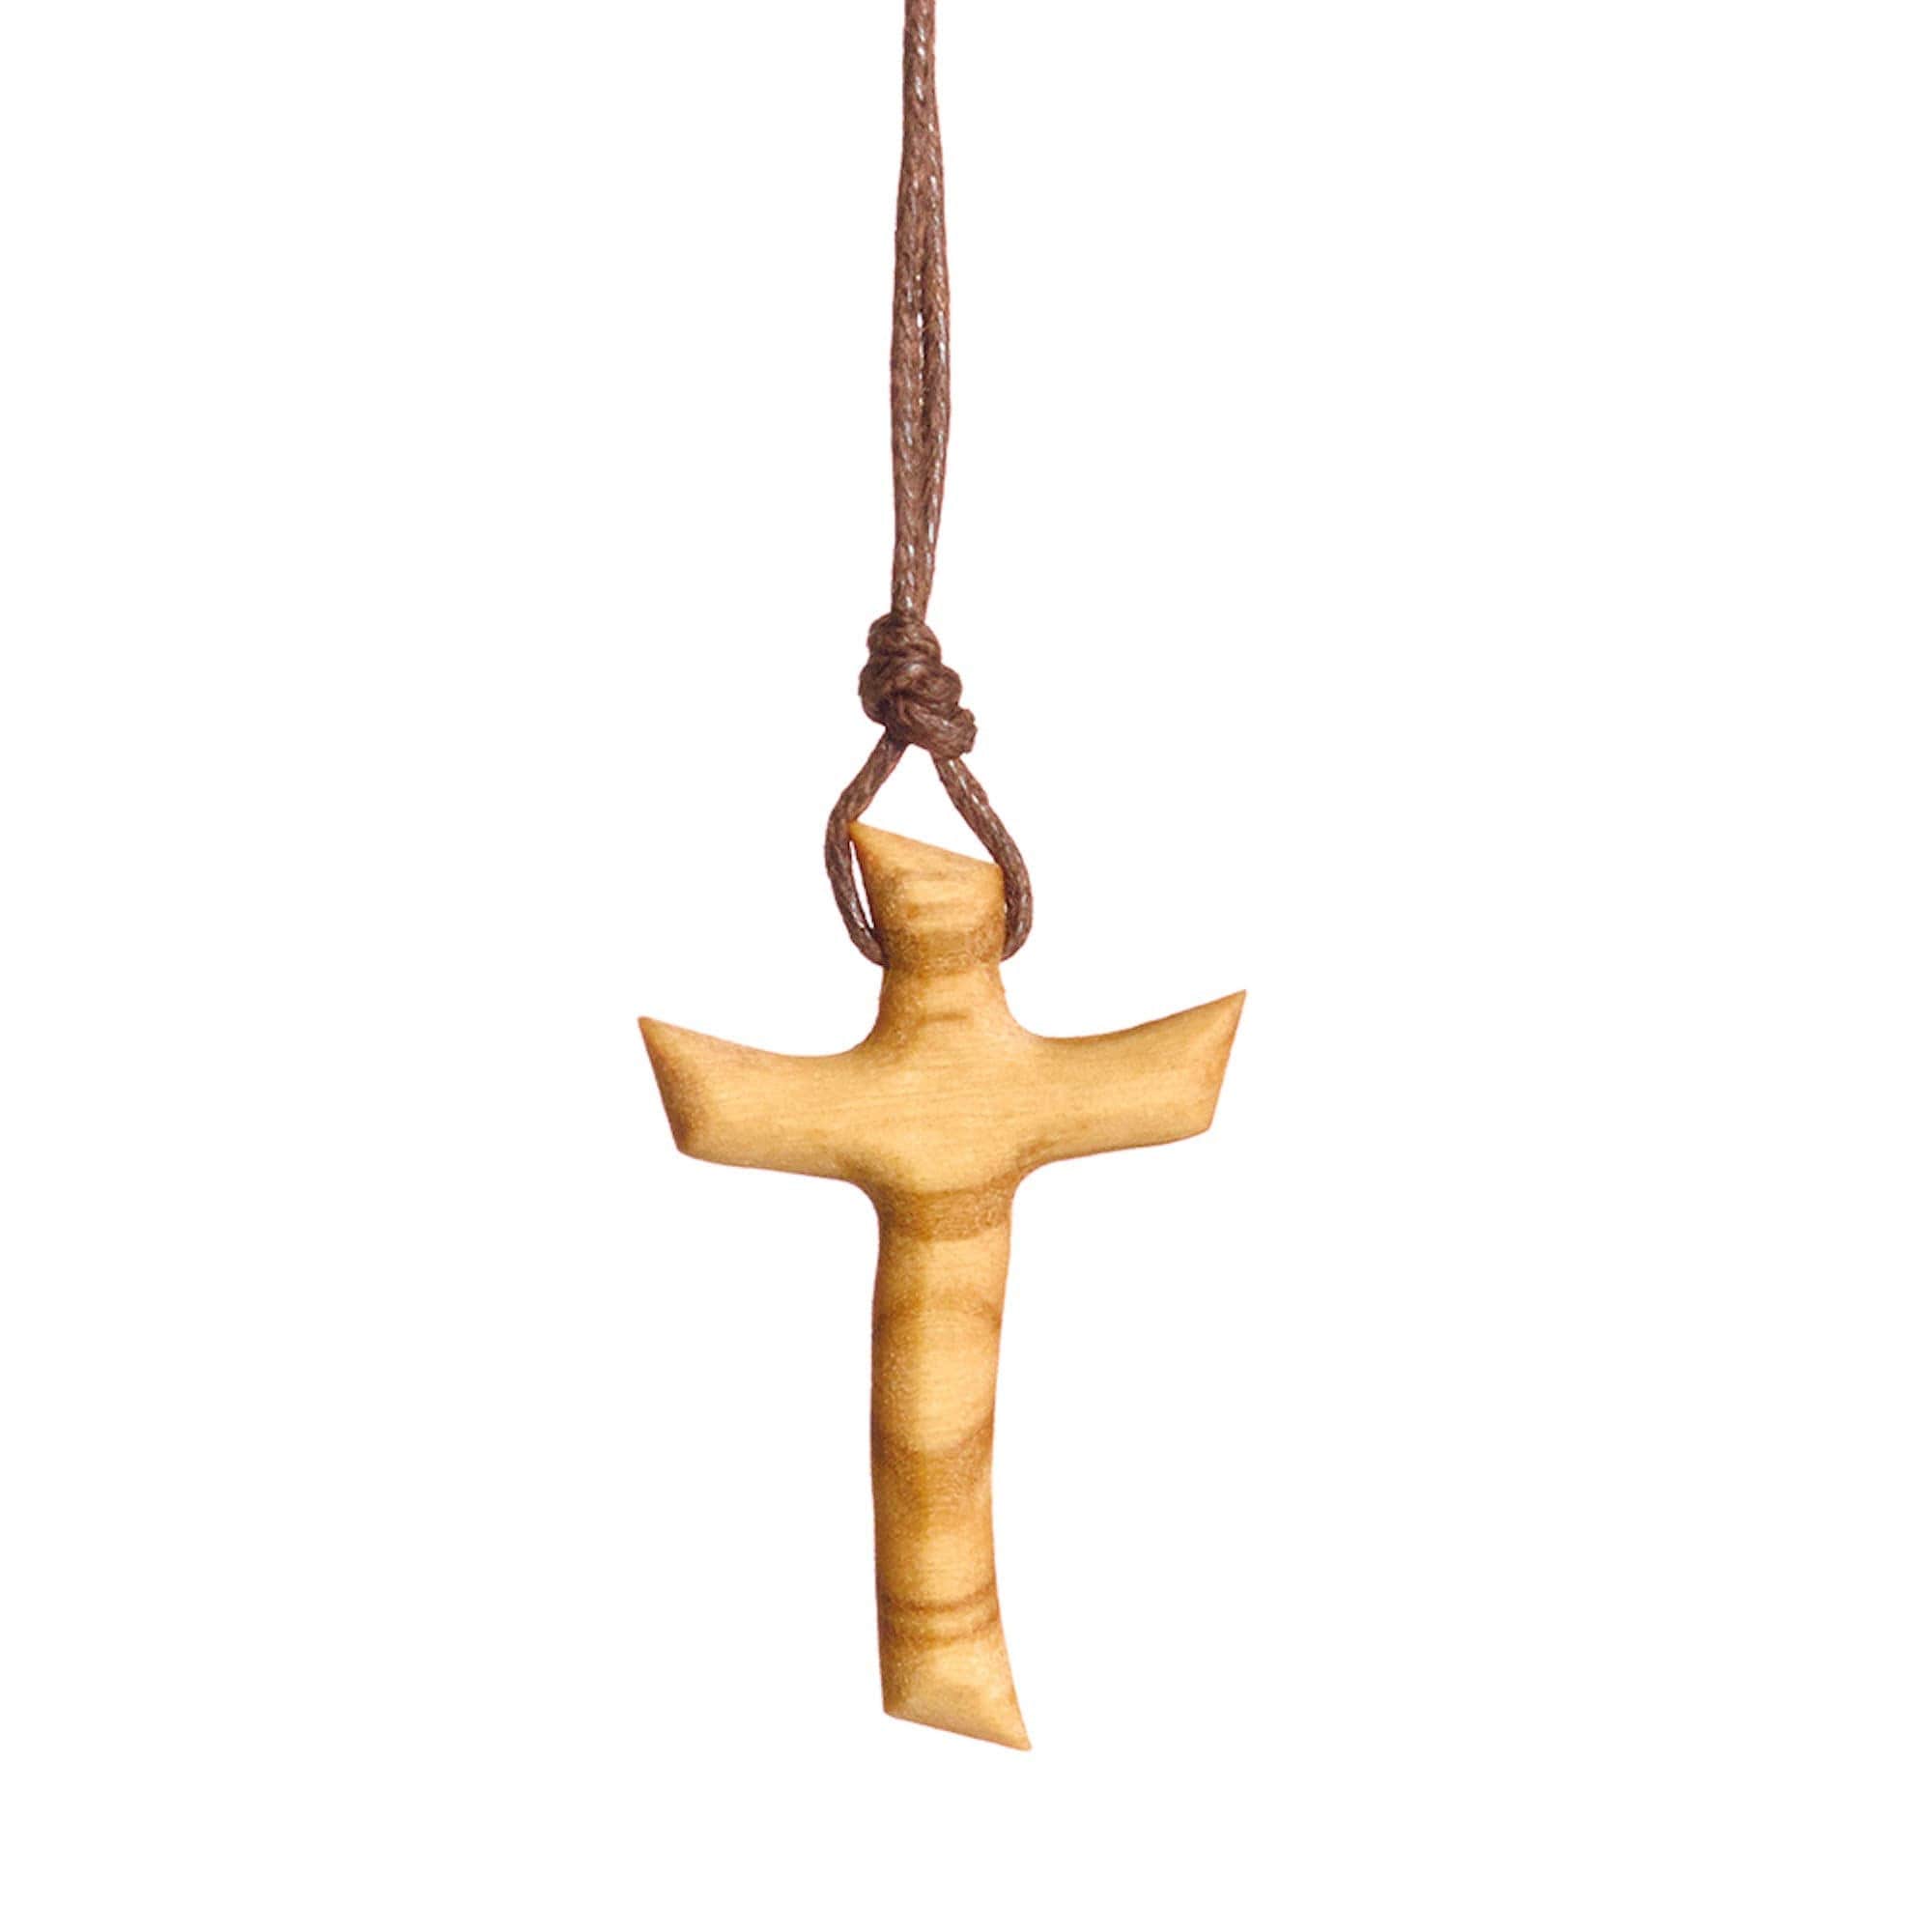 Heart Centered Olive Wood Cross Necklace with Resin Embellishments